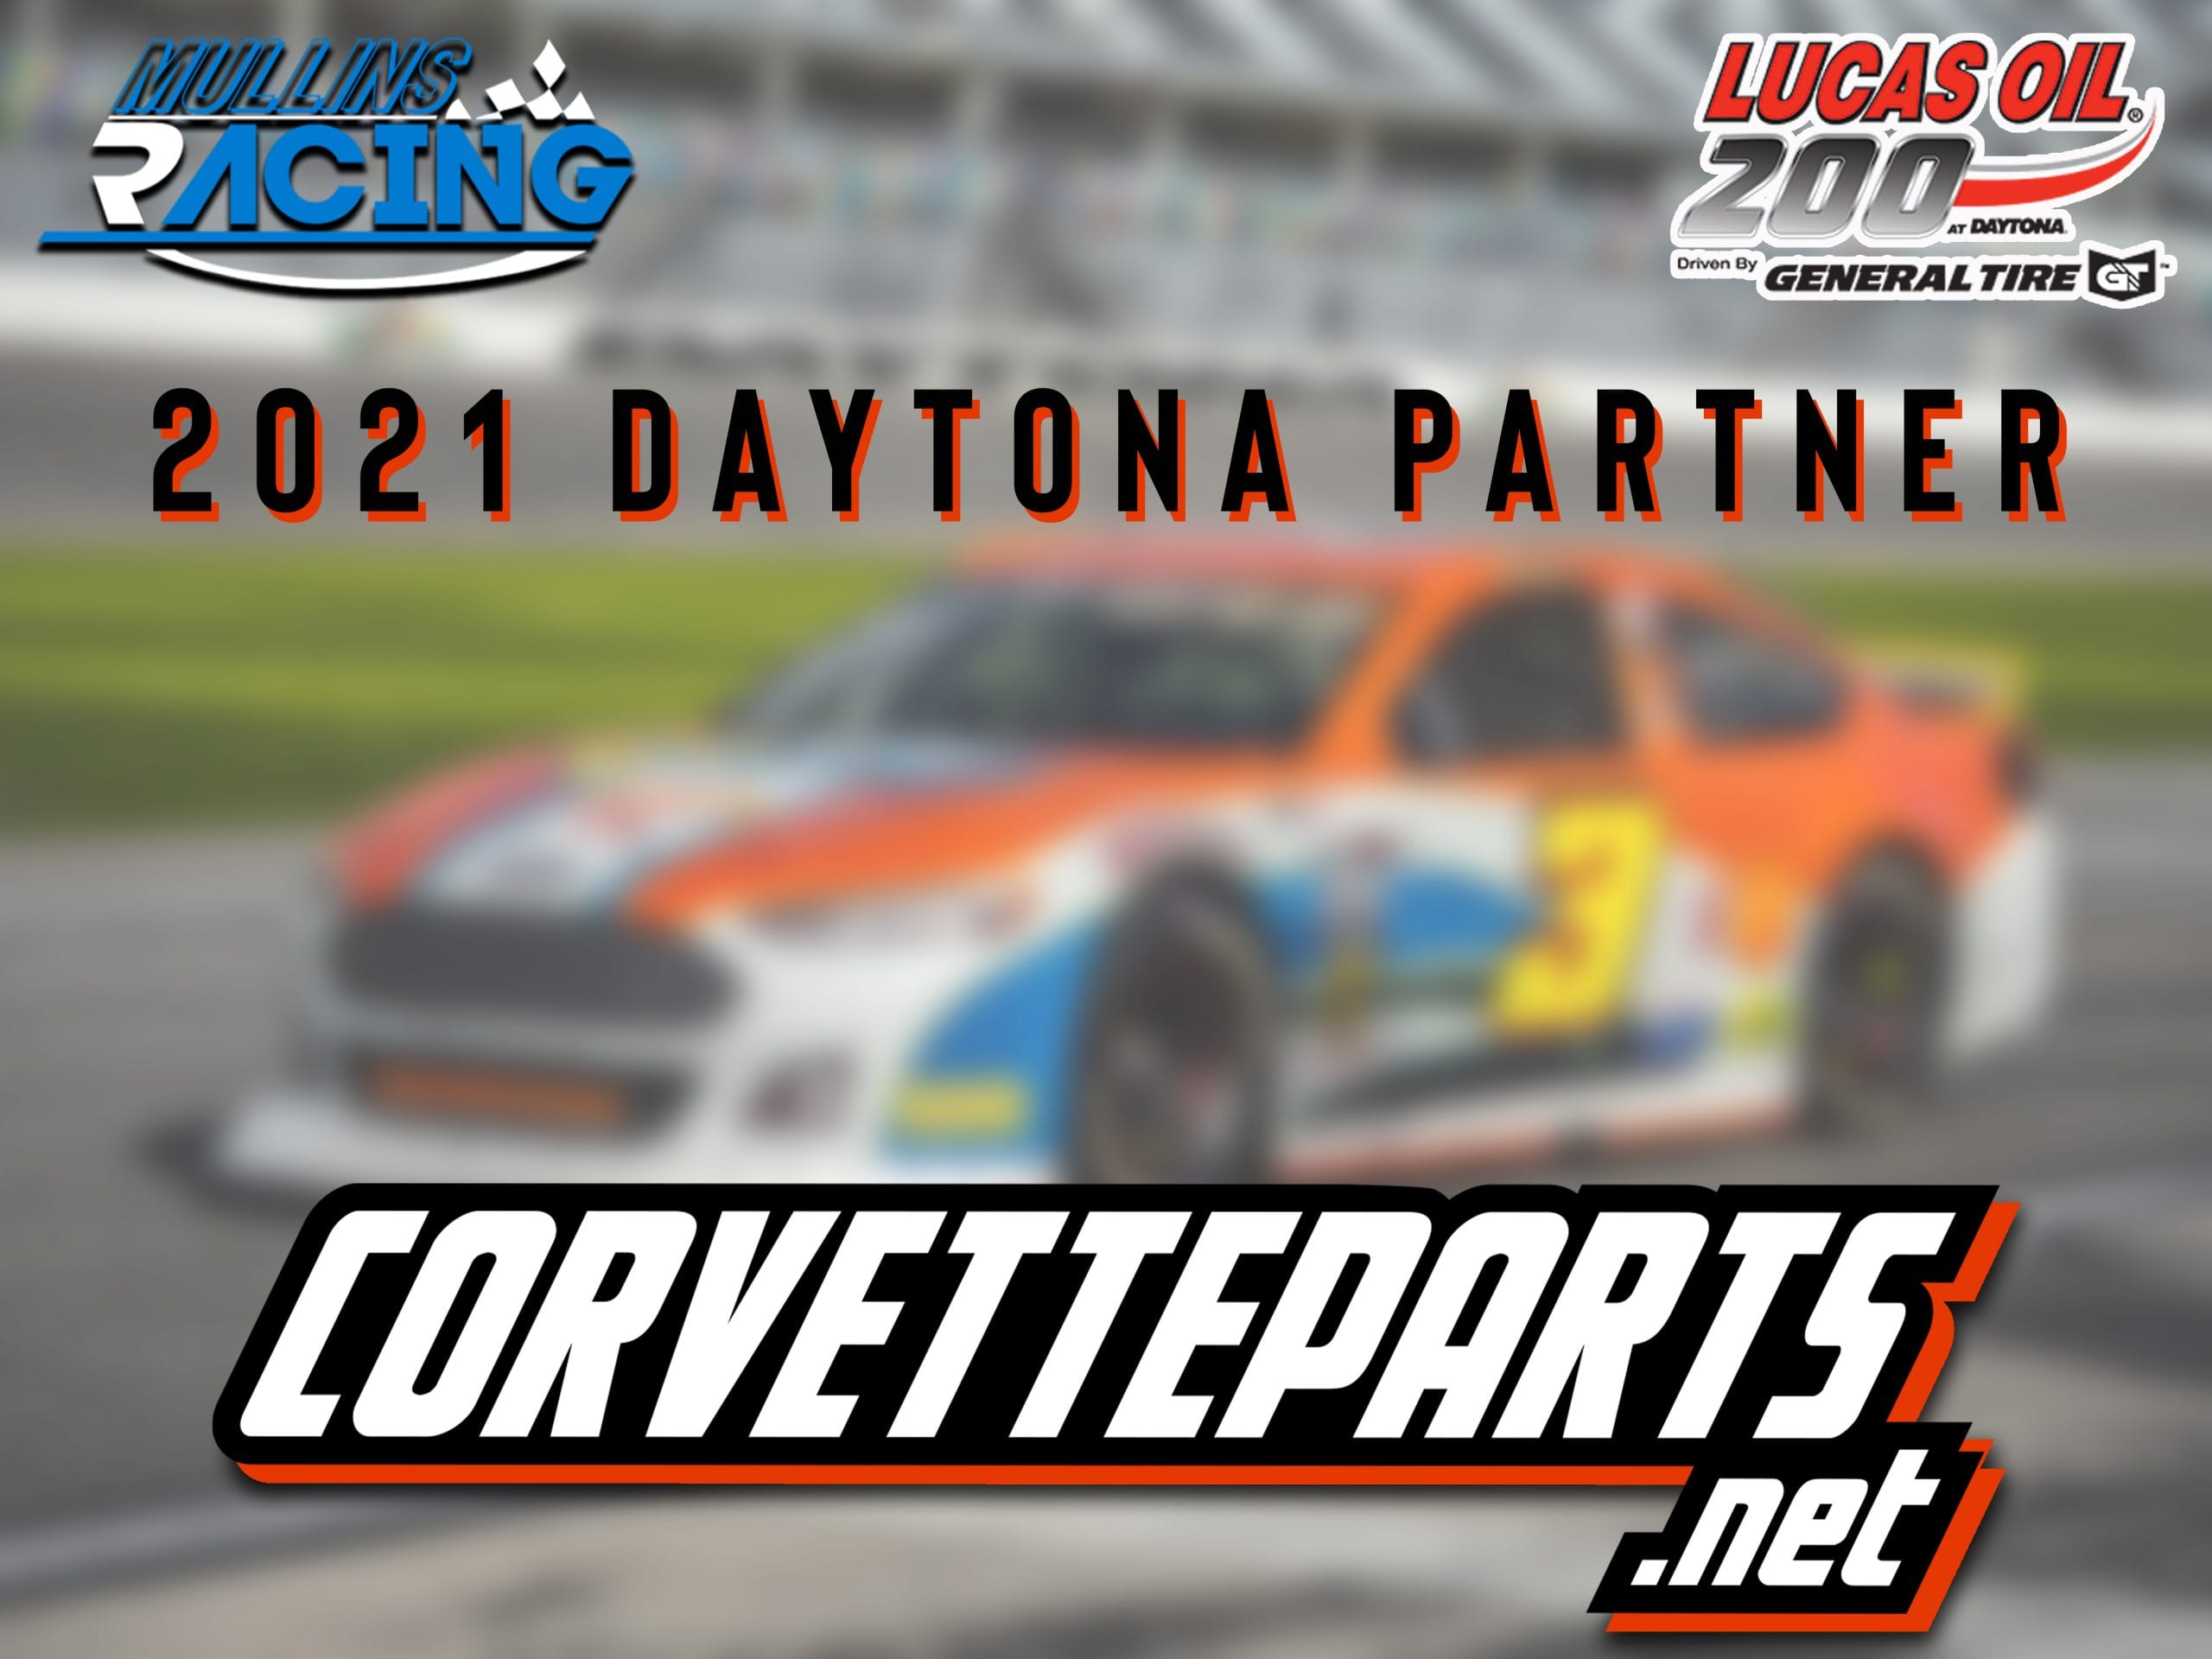 CorvetteParts.net has joined Mullins Racing for the ARCA Menards Series opener at Daytona Int'l Speedway.